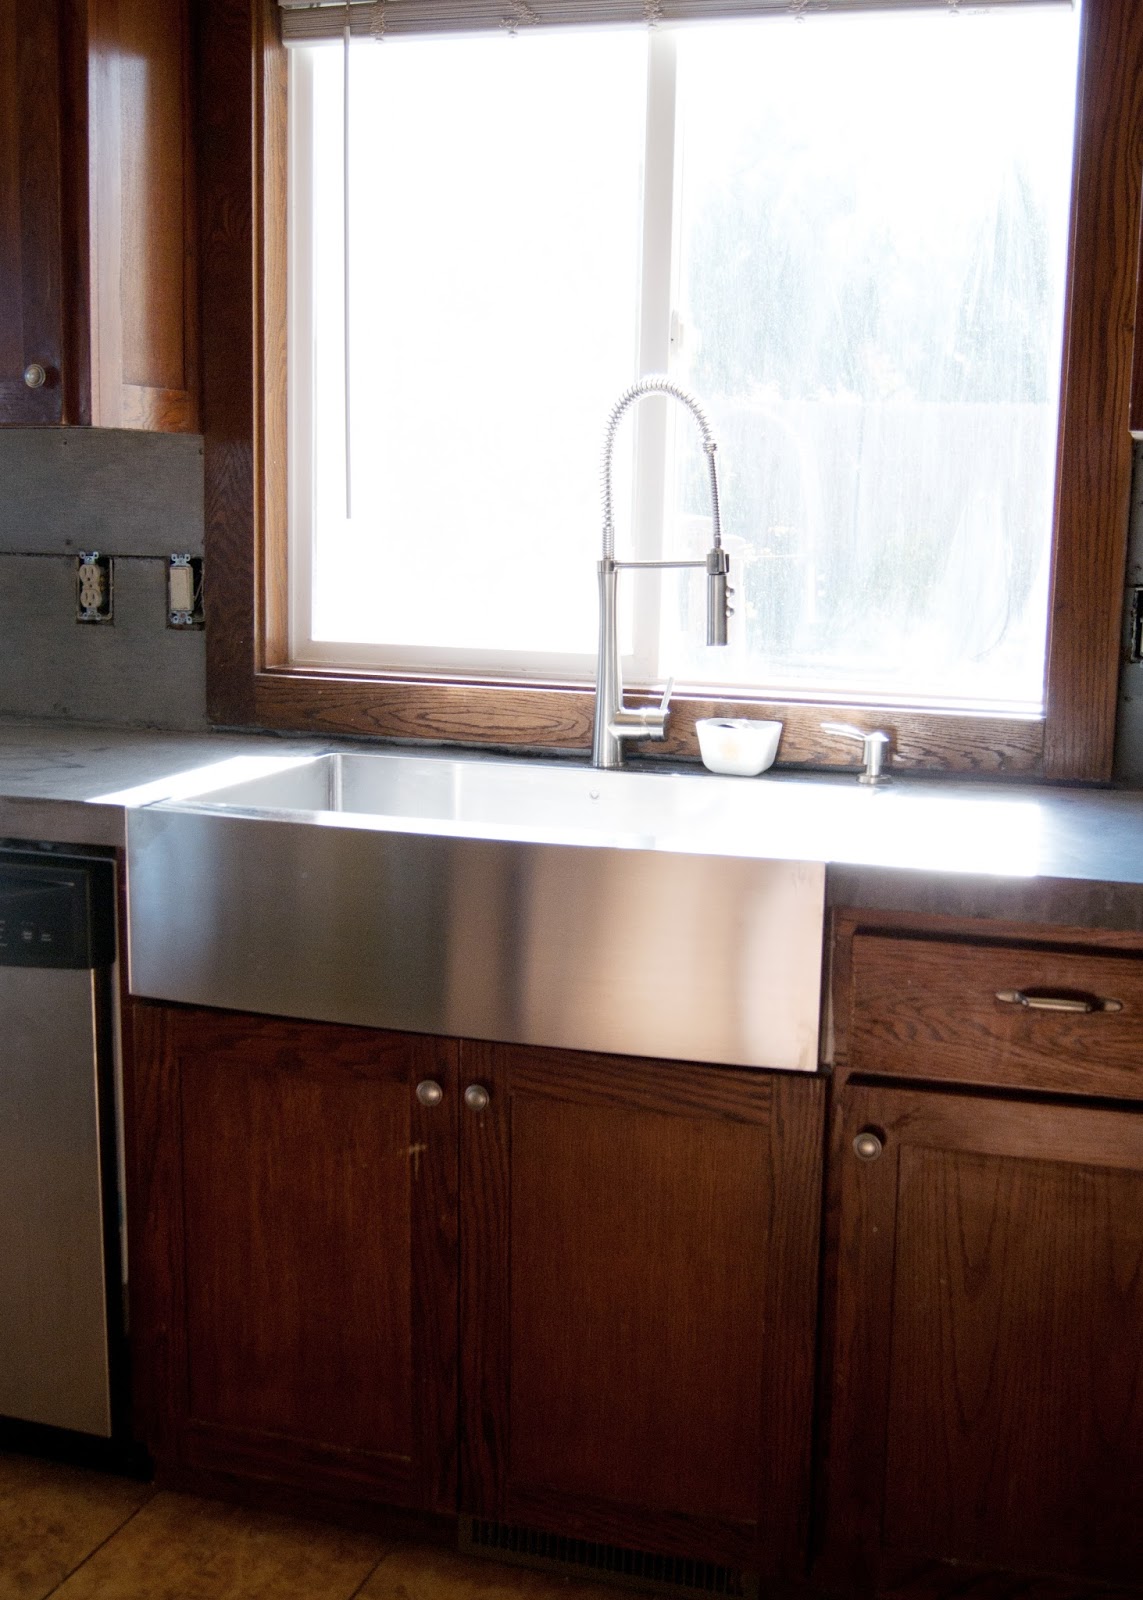 New Stainless Steel Apron Front Sink + how we installed it in existing